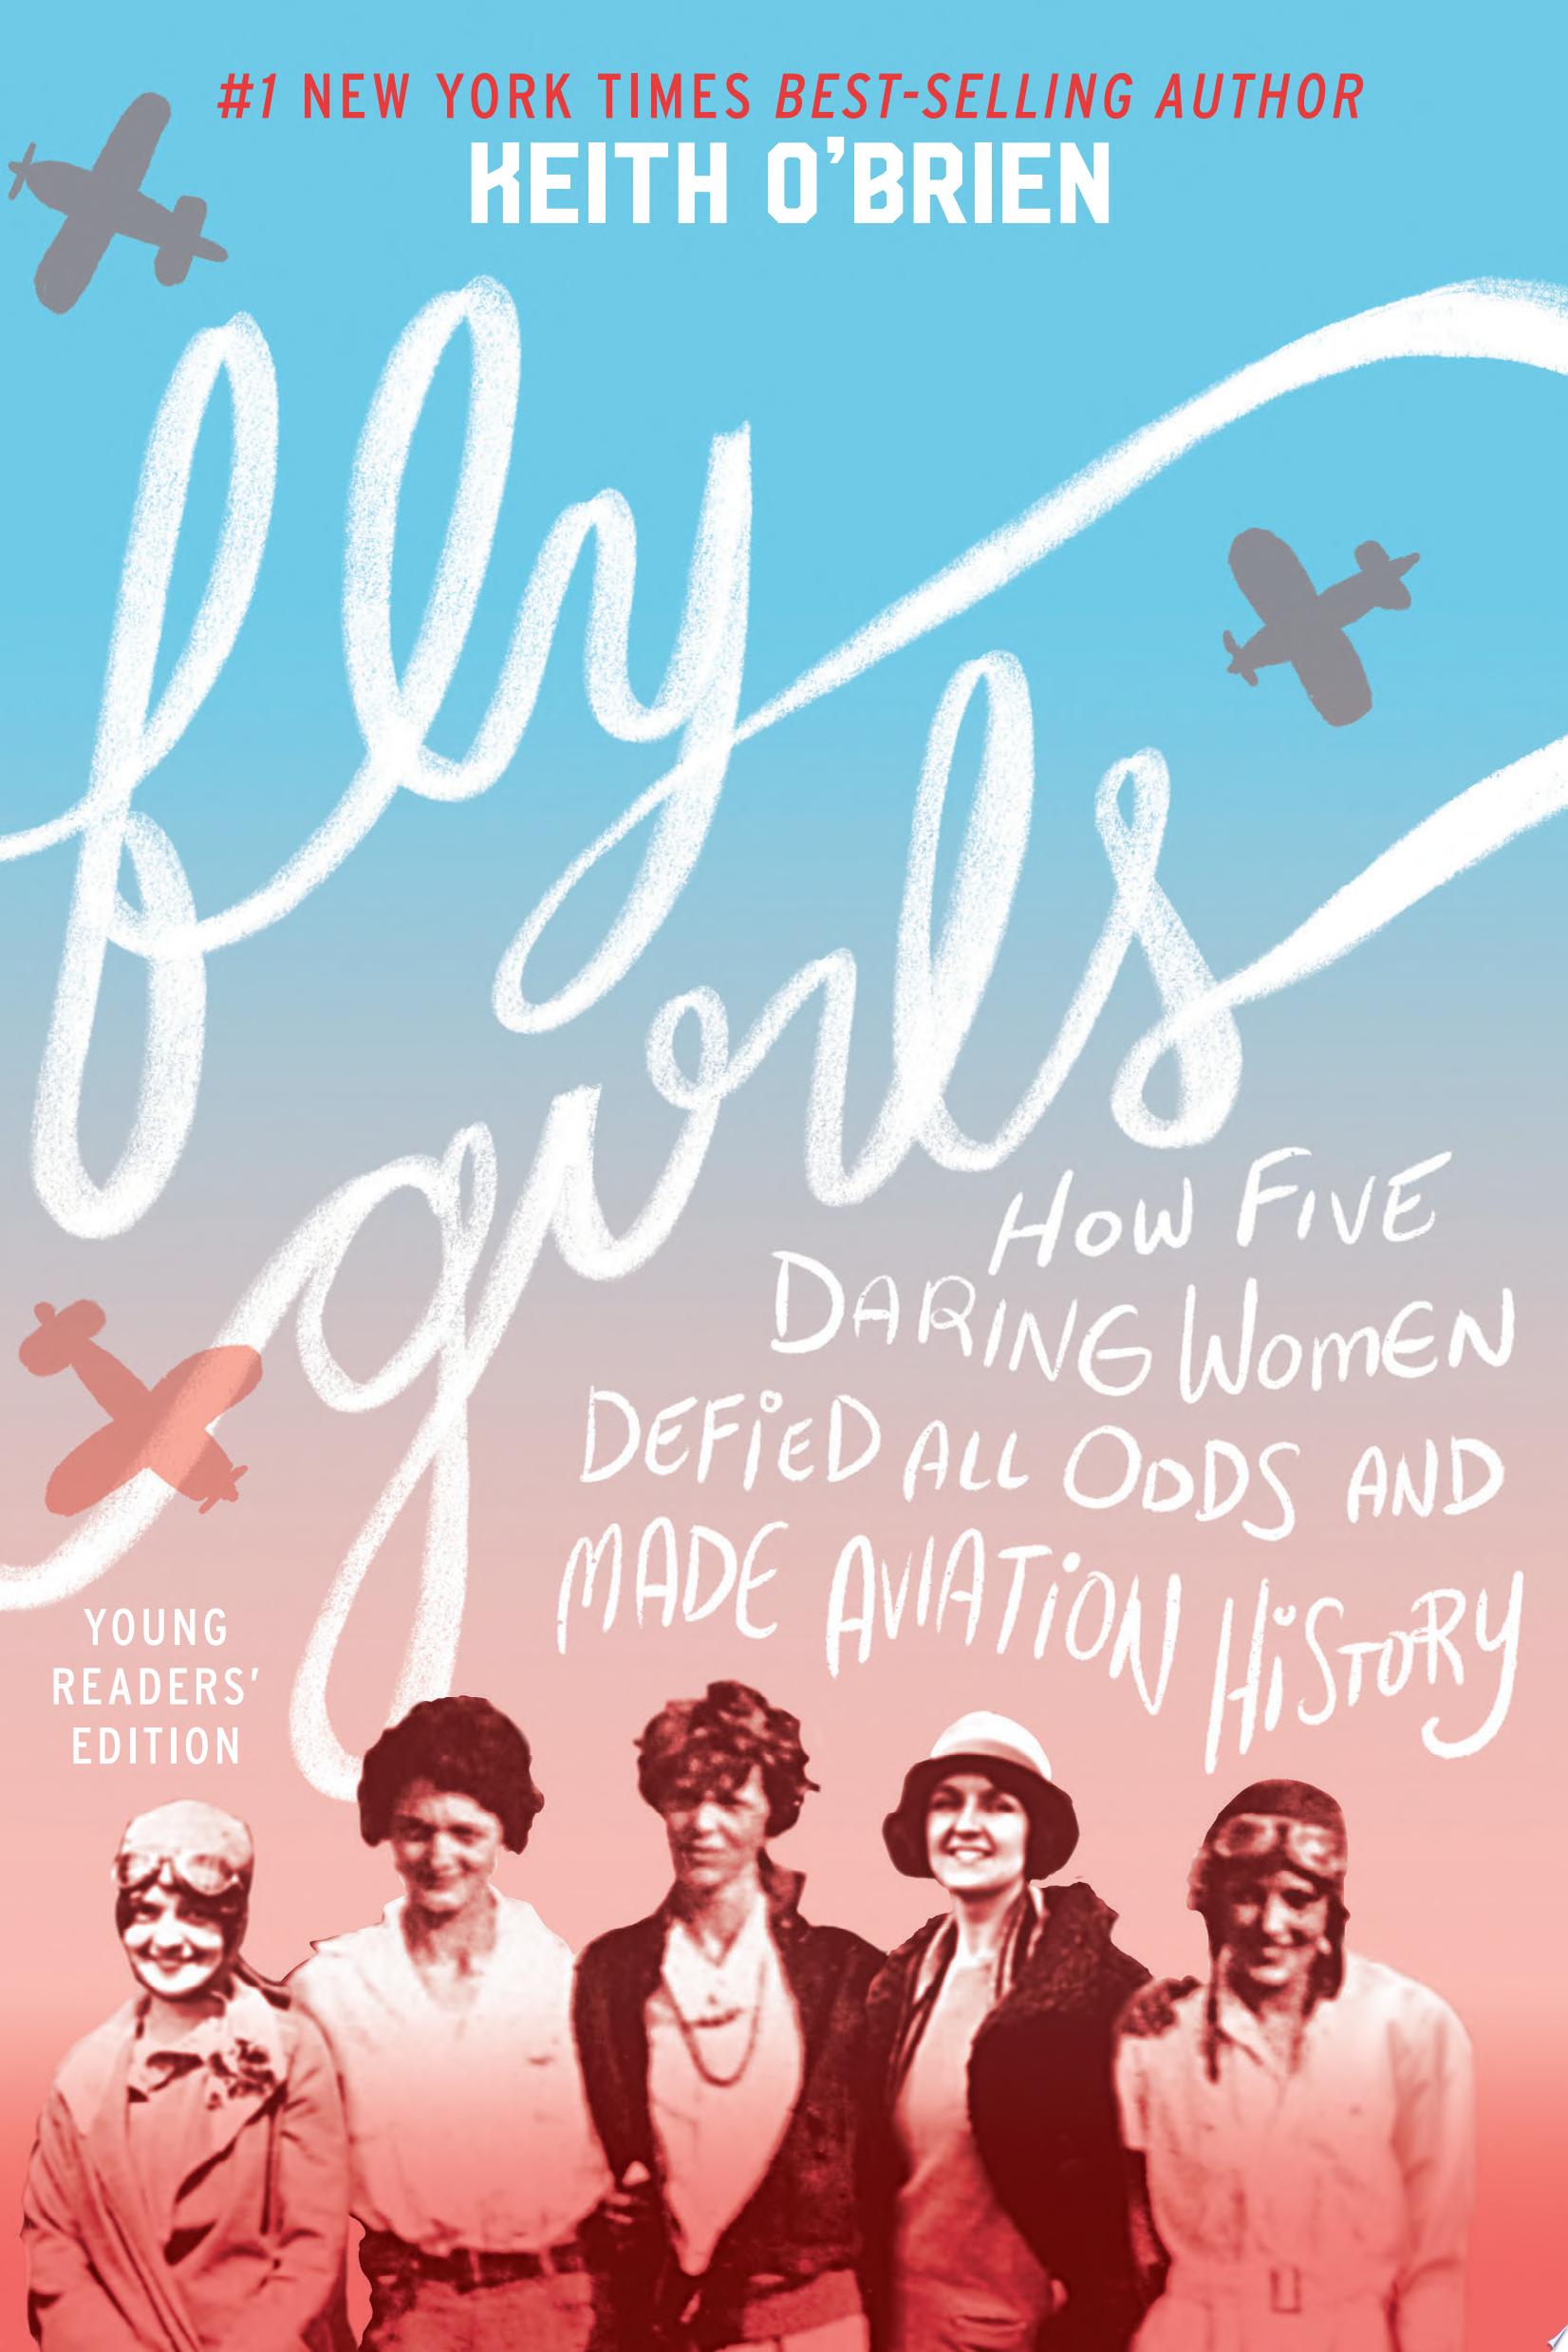 Image for "Fly Girls"